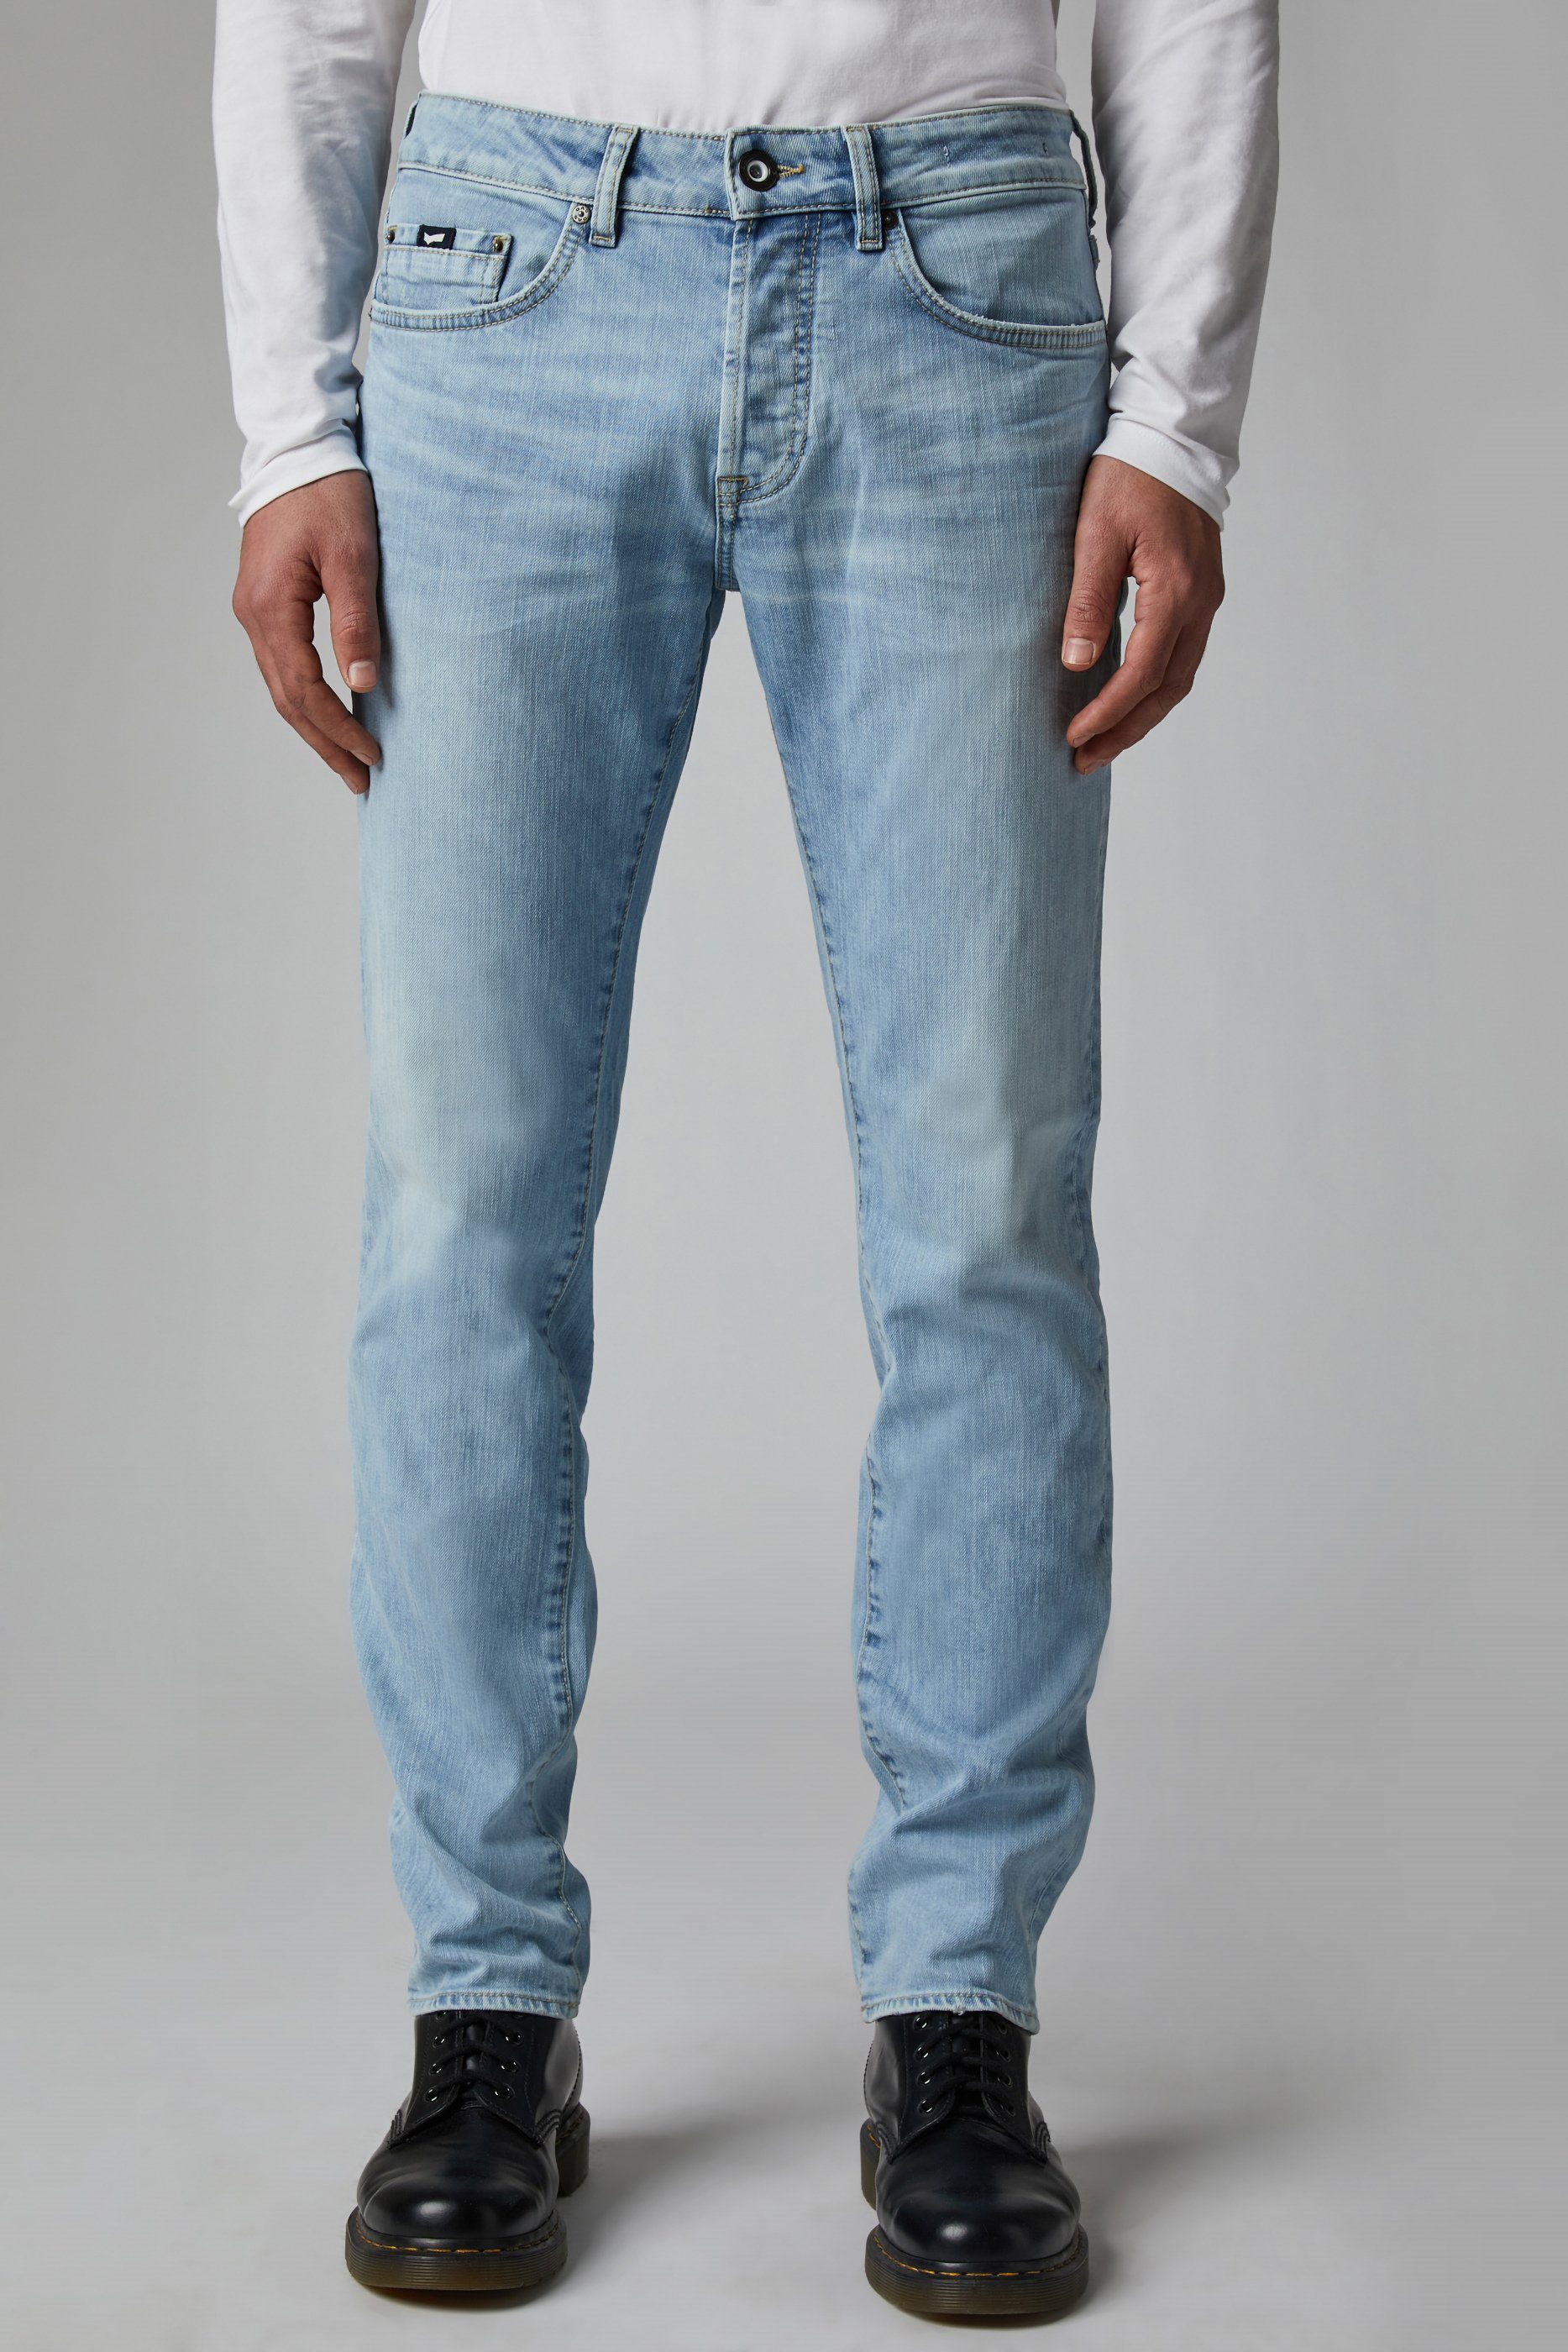 mit Slim-fit-Jeans Super-Bleached-Waschung wash bleach super GAS ANDERS